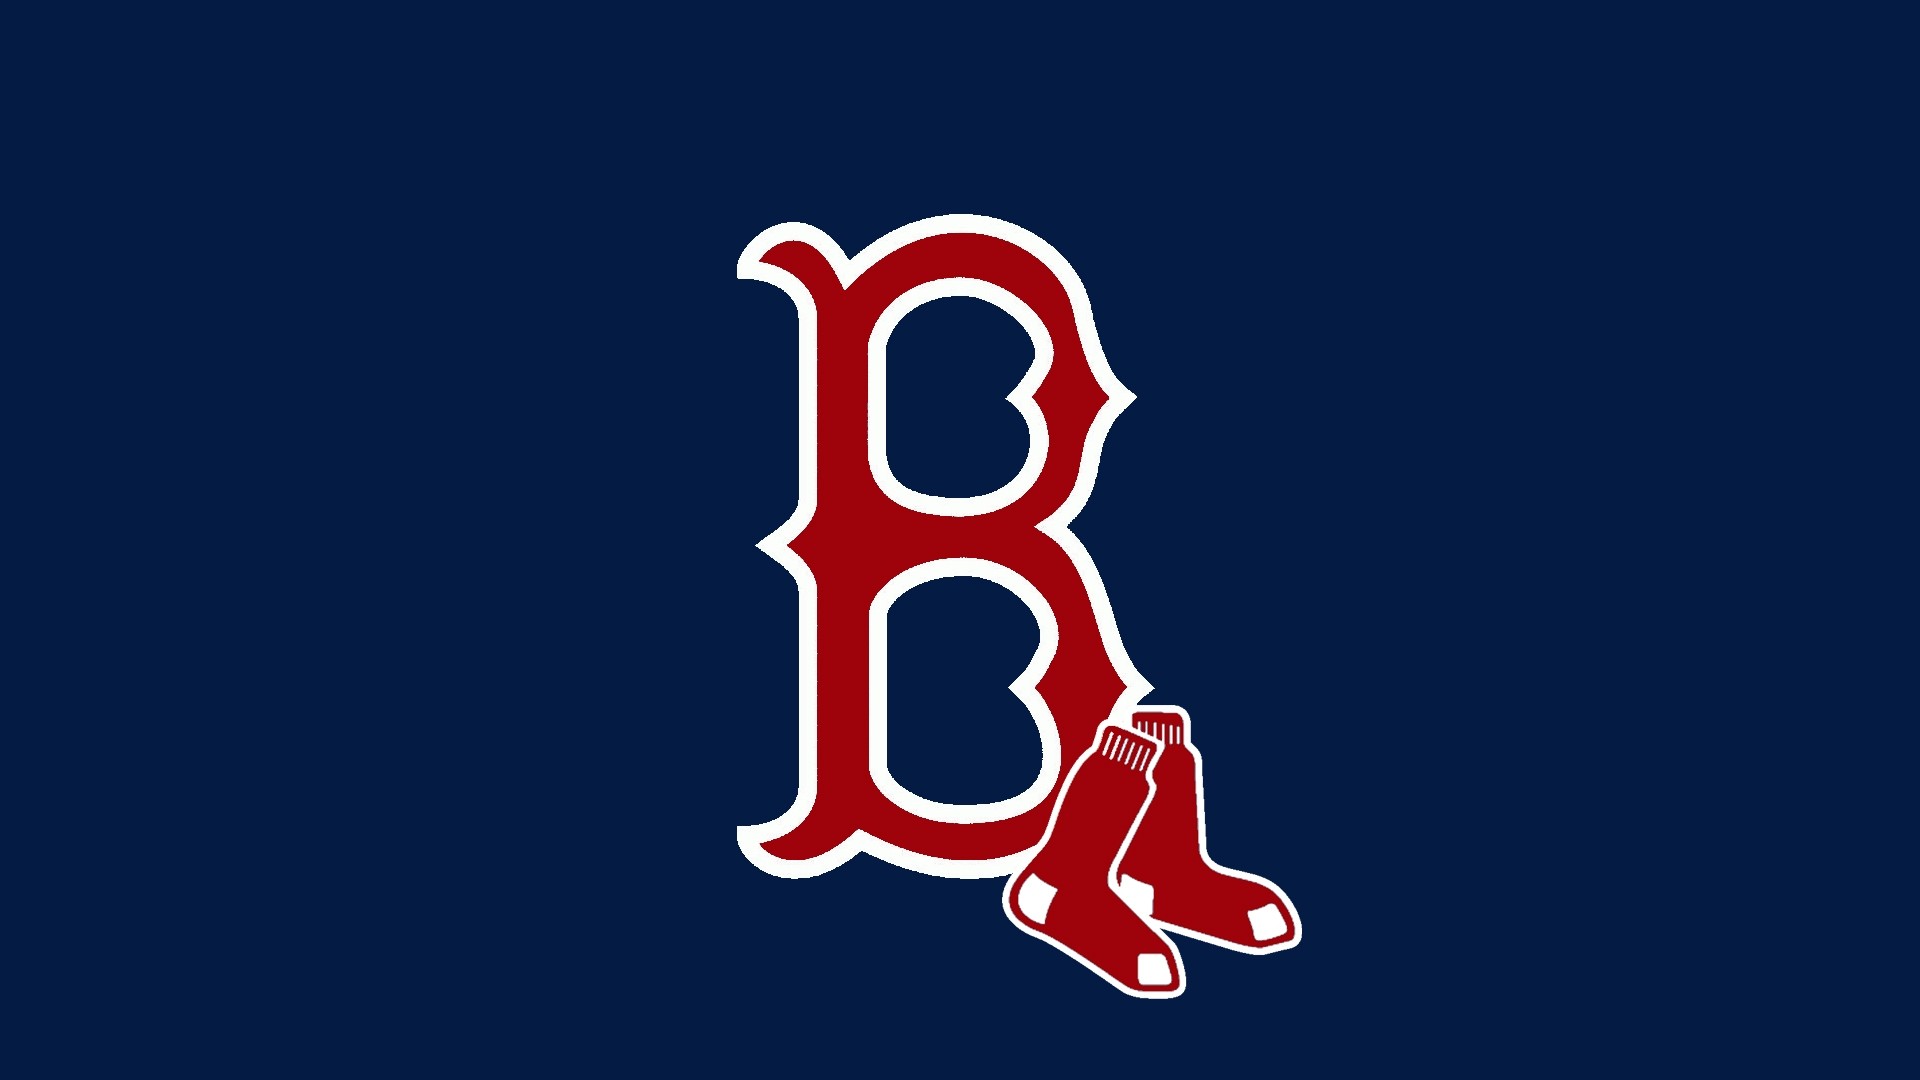 1920x1080 ... Cool Sports Wallpapers wallpaper sports cool red photo pictures boston  114525 ...